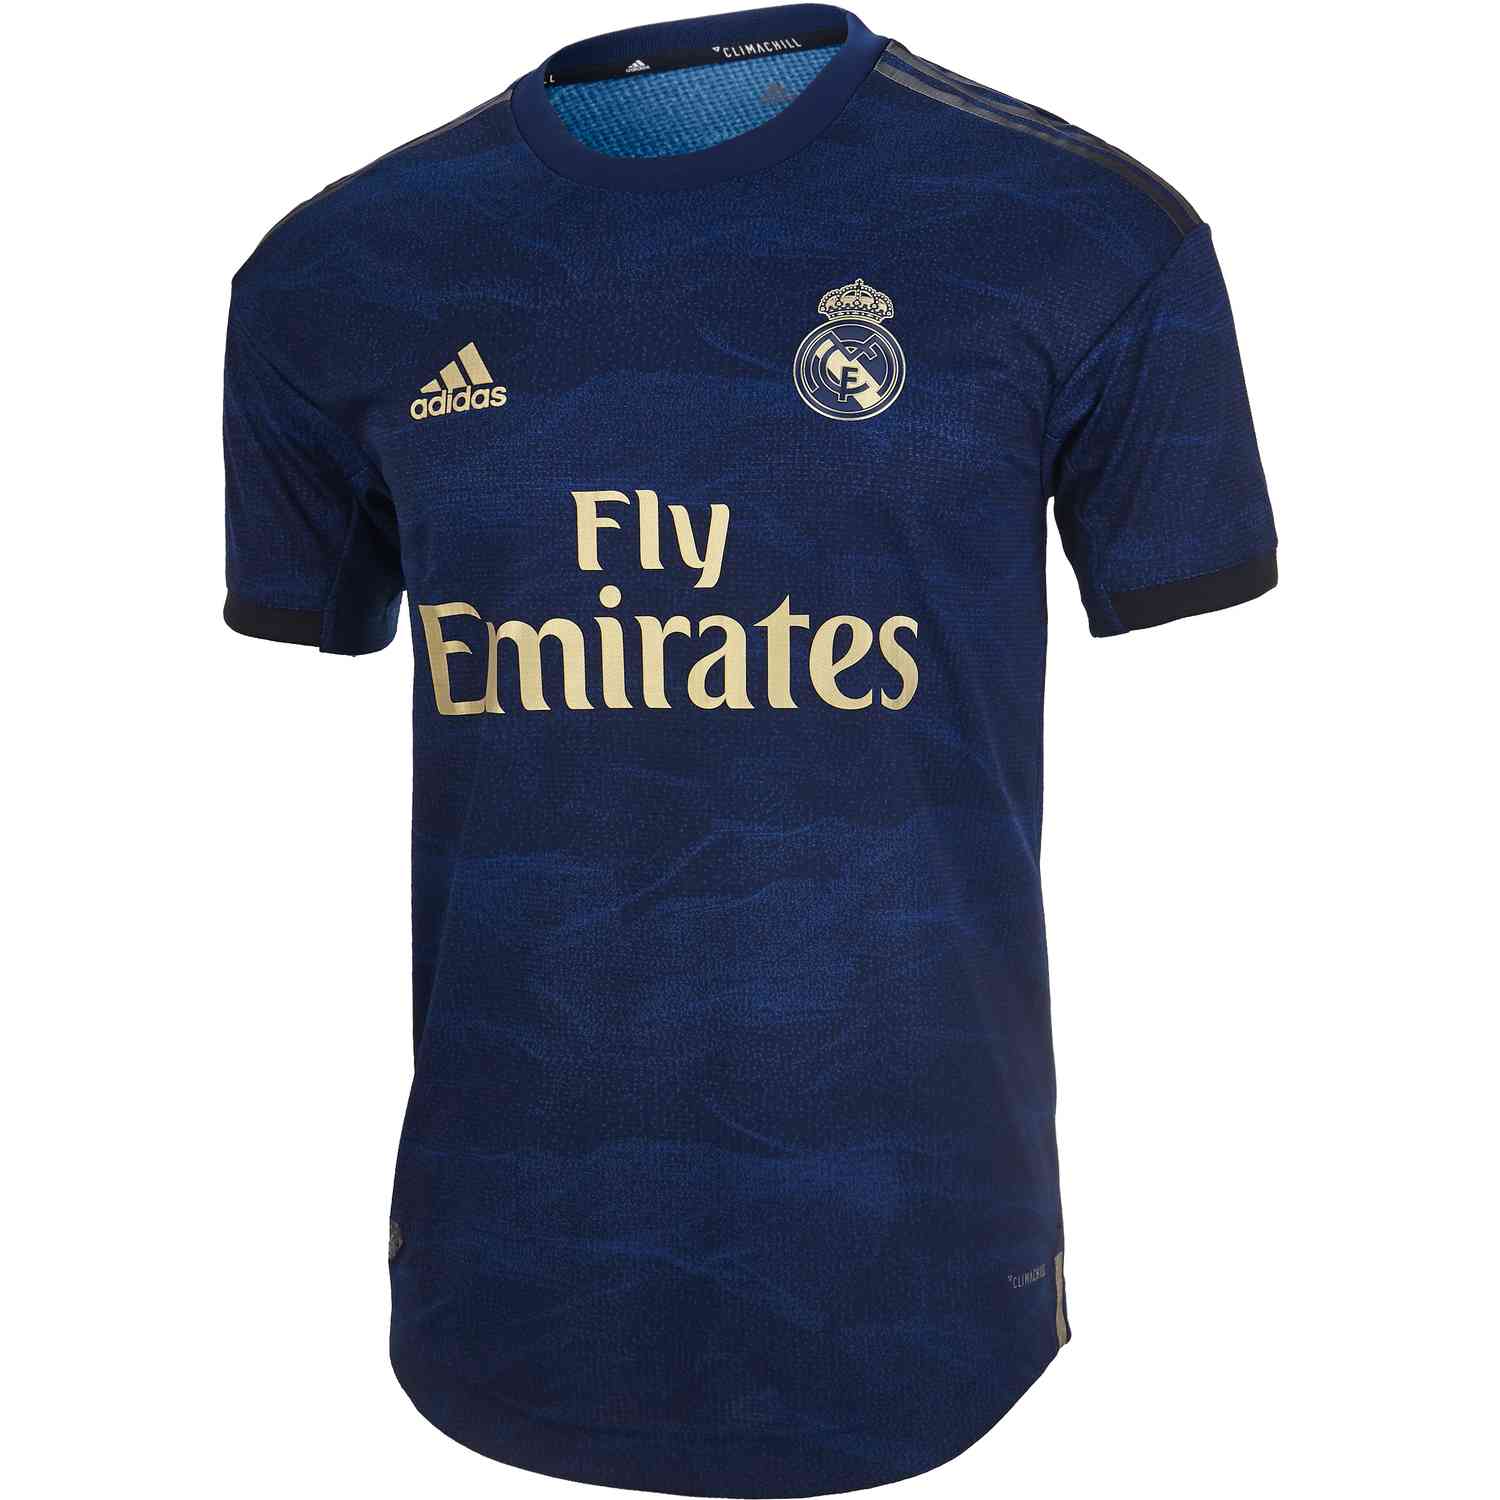 2019/20 adidas Real Madrid Away Authentic Jersey - SoccerPro